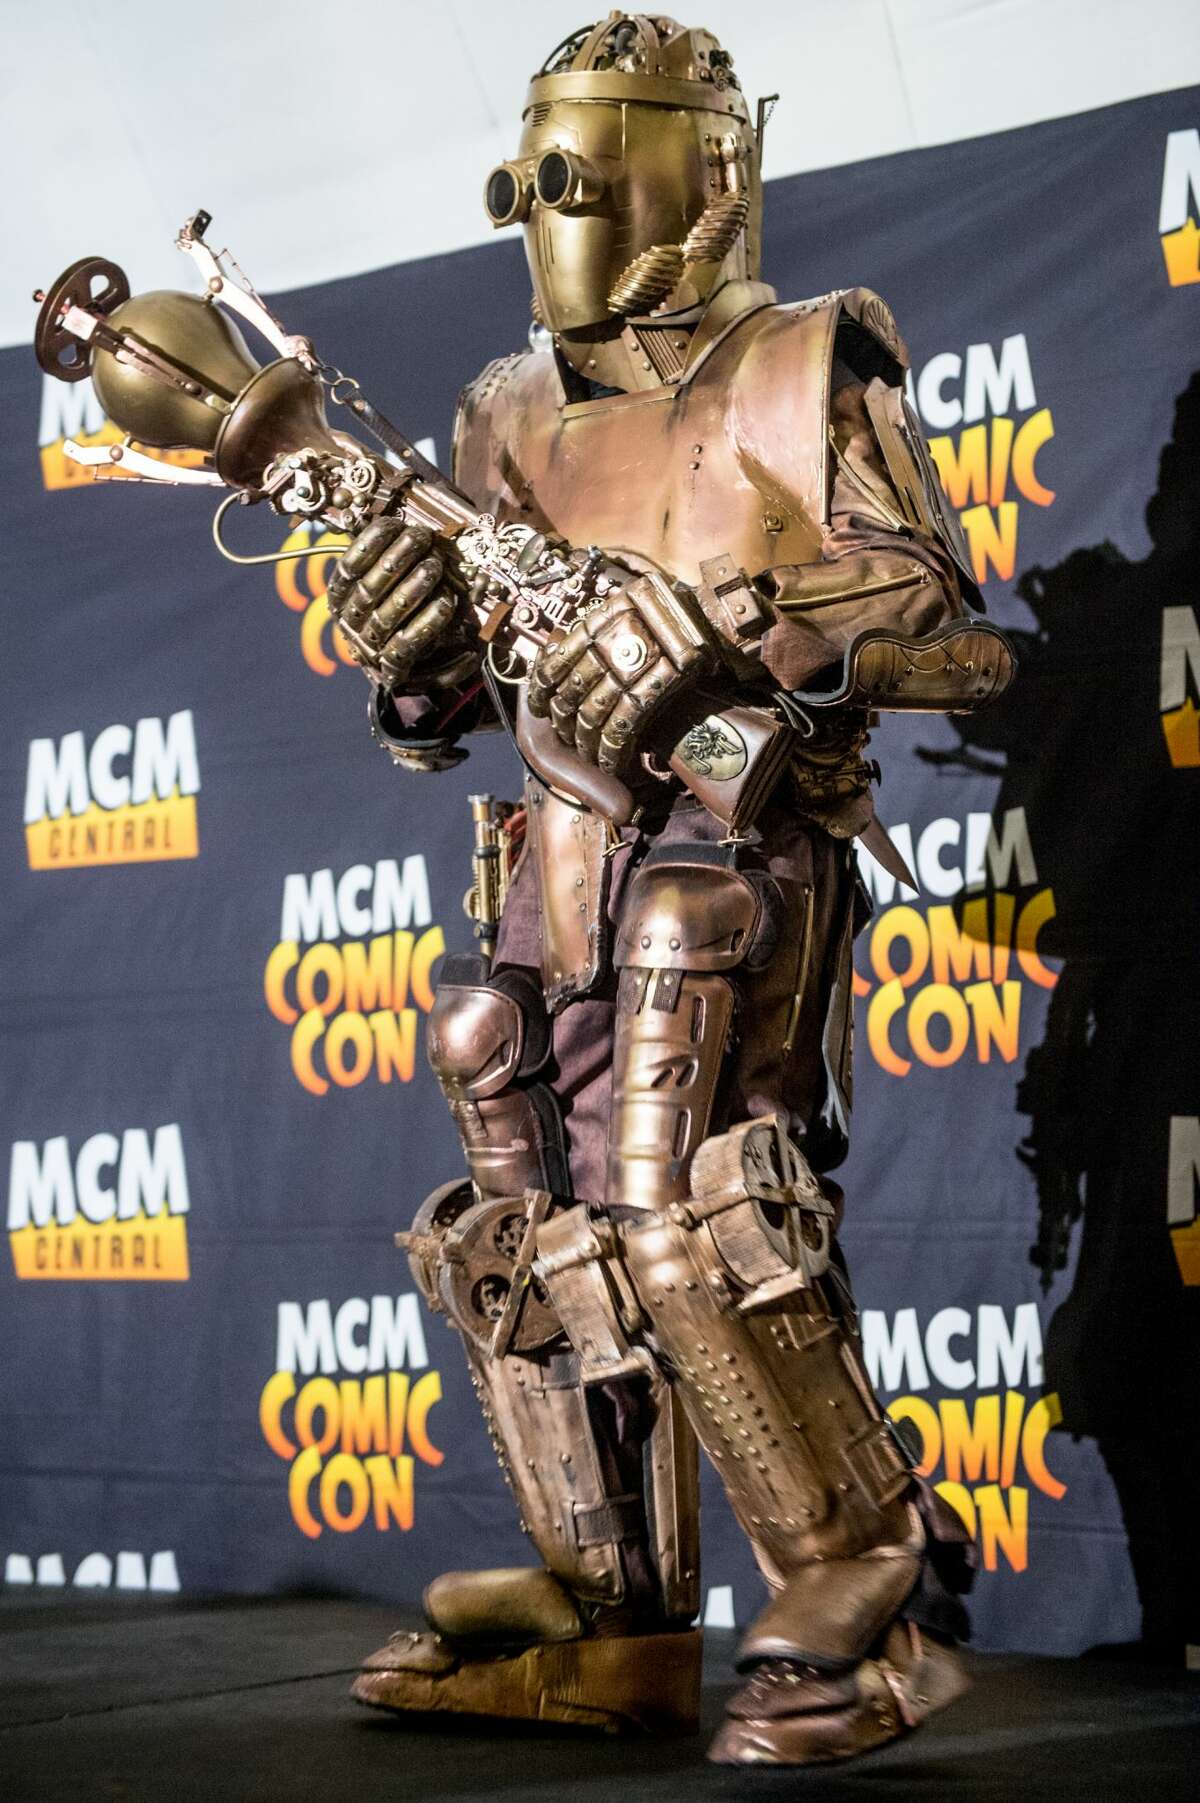 A cosplayer dressed as a Victorian steampunk robot British soldier on day 2 of the November Birmingham MCM Comic Con at the National Exhibition Centre (NEC) in Birmingham, UK on November 20, 2016 in Birmingham, England.